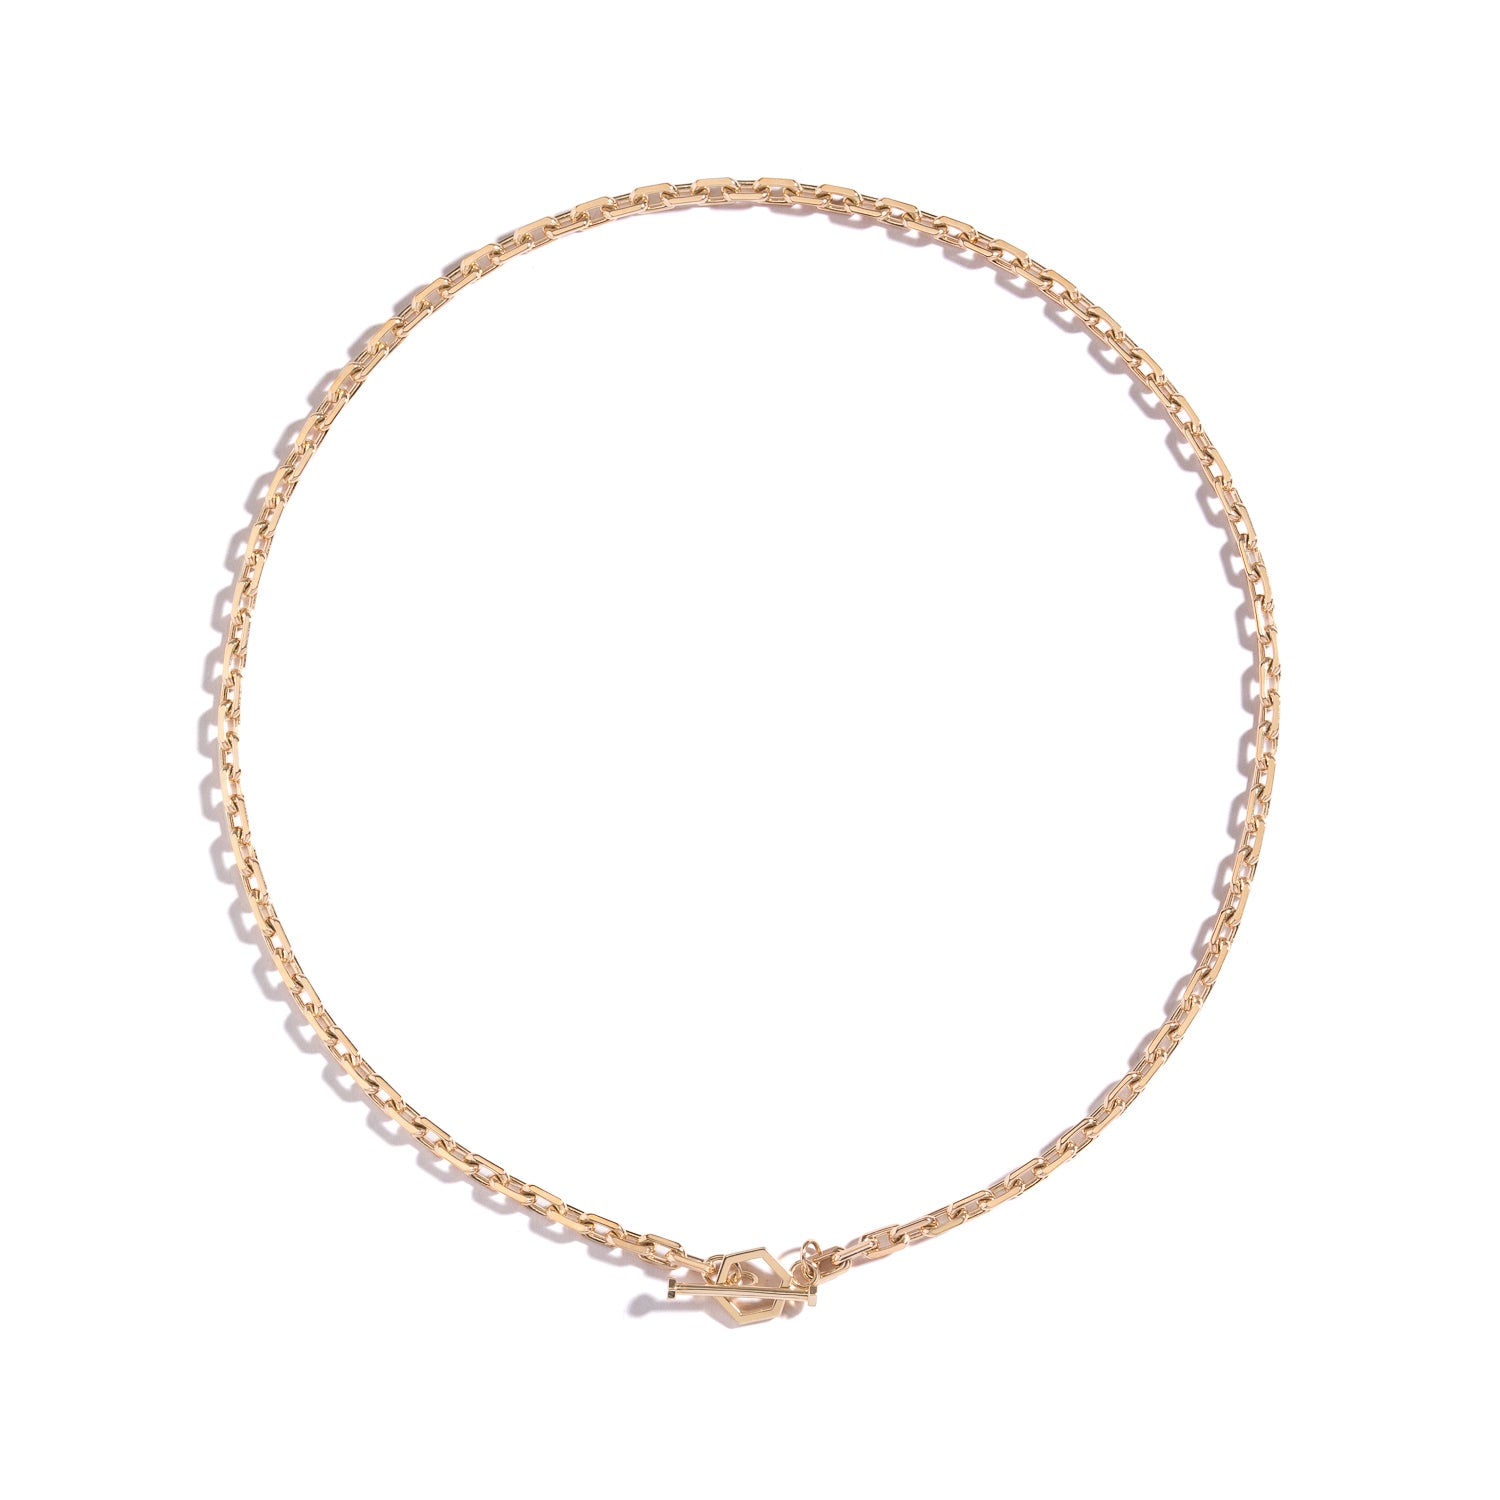 Shahla Karimi 4mm Toggle Chain 16" in 14K Yellow Gold.